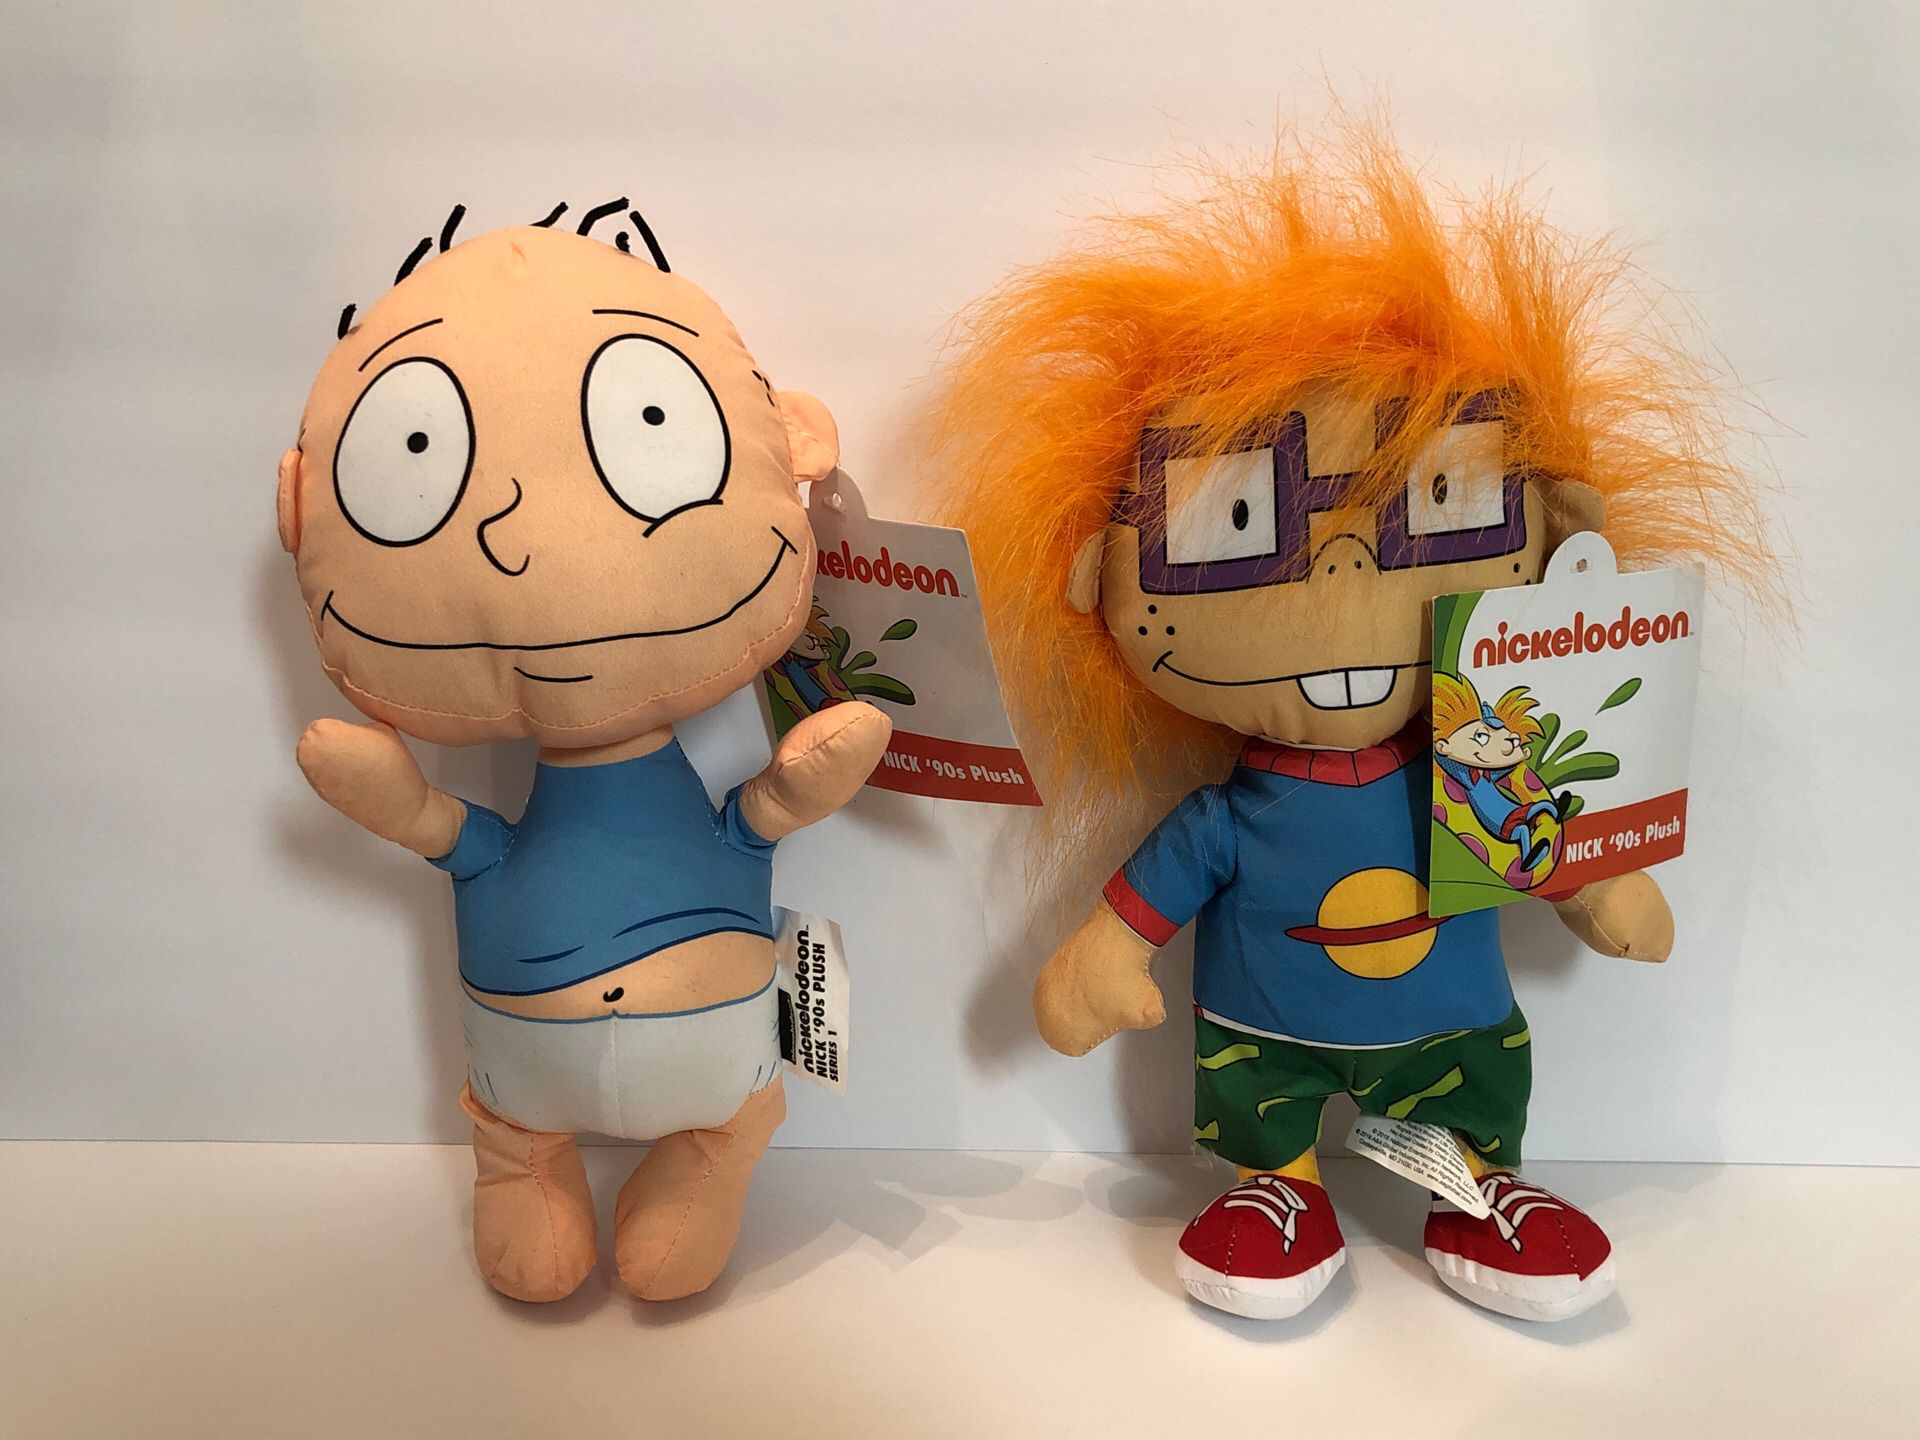 The Rugrats Tommy & Chuckie 10” Plush Nickelodeon 90’s Plush